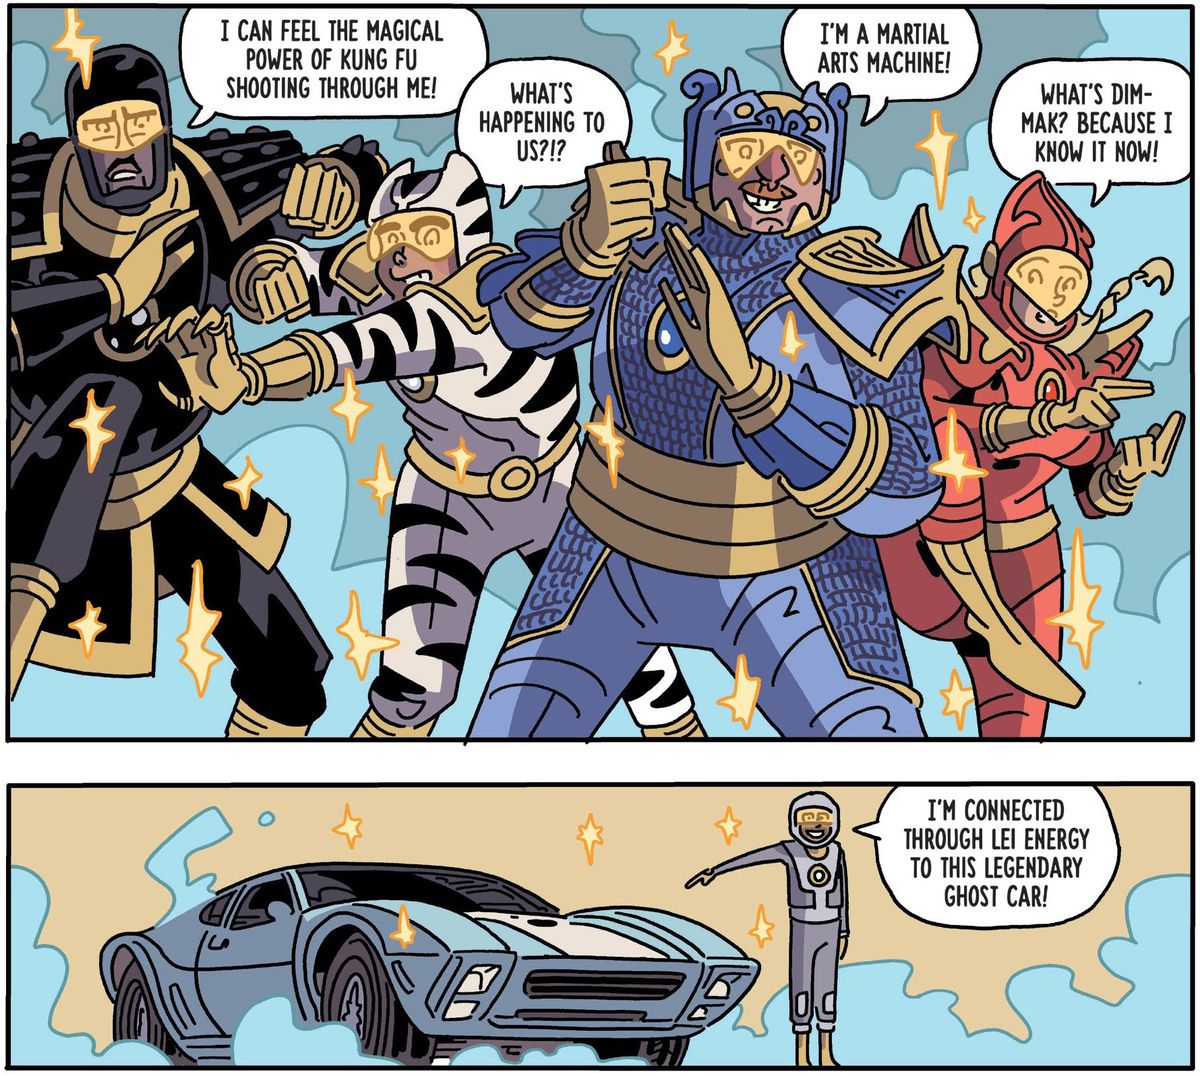 Four power-rangers like characters loudly and woodenly discuss how they suddenly have vast martial artist knowledge. A panel later, a fifth character points hilariously at a silver automobile while shouting “I’m connected through lei energy to this legendary ghost car!” in Six Sidekicks of Trigger Keaton #6 (2021). 